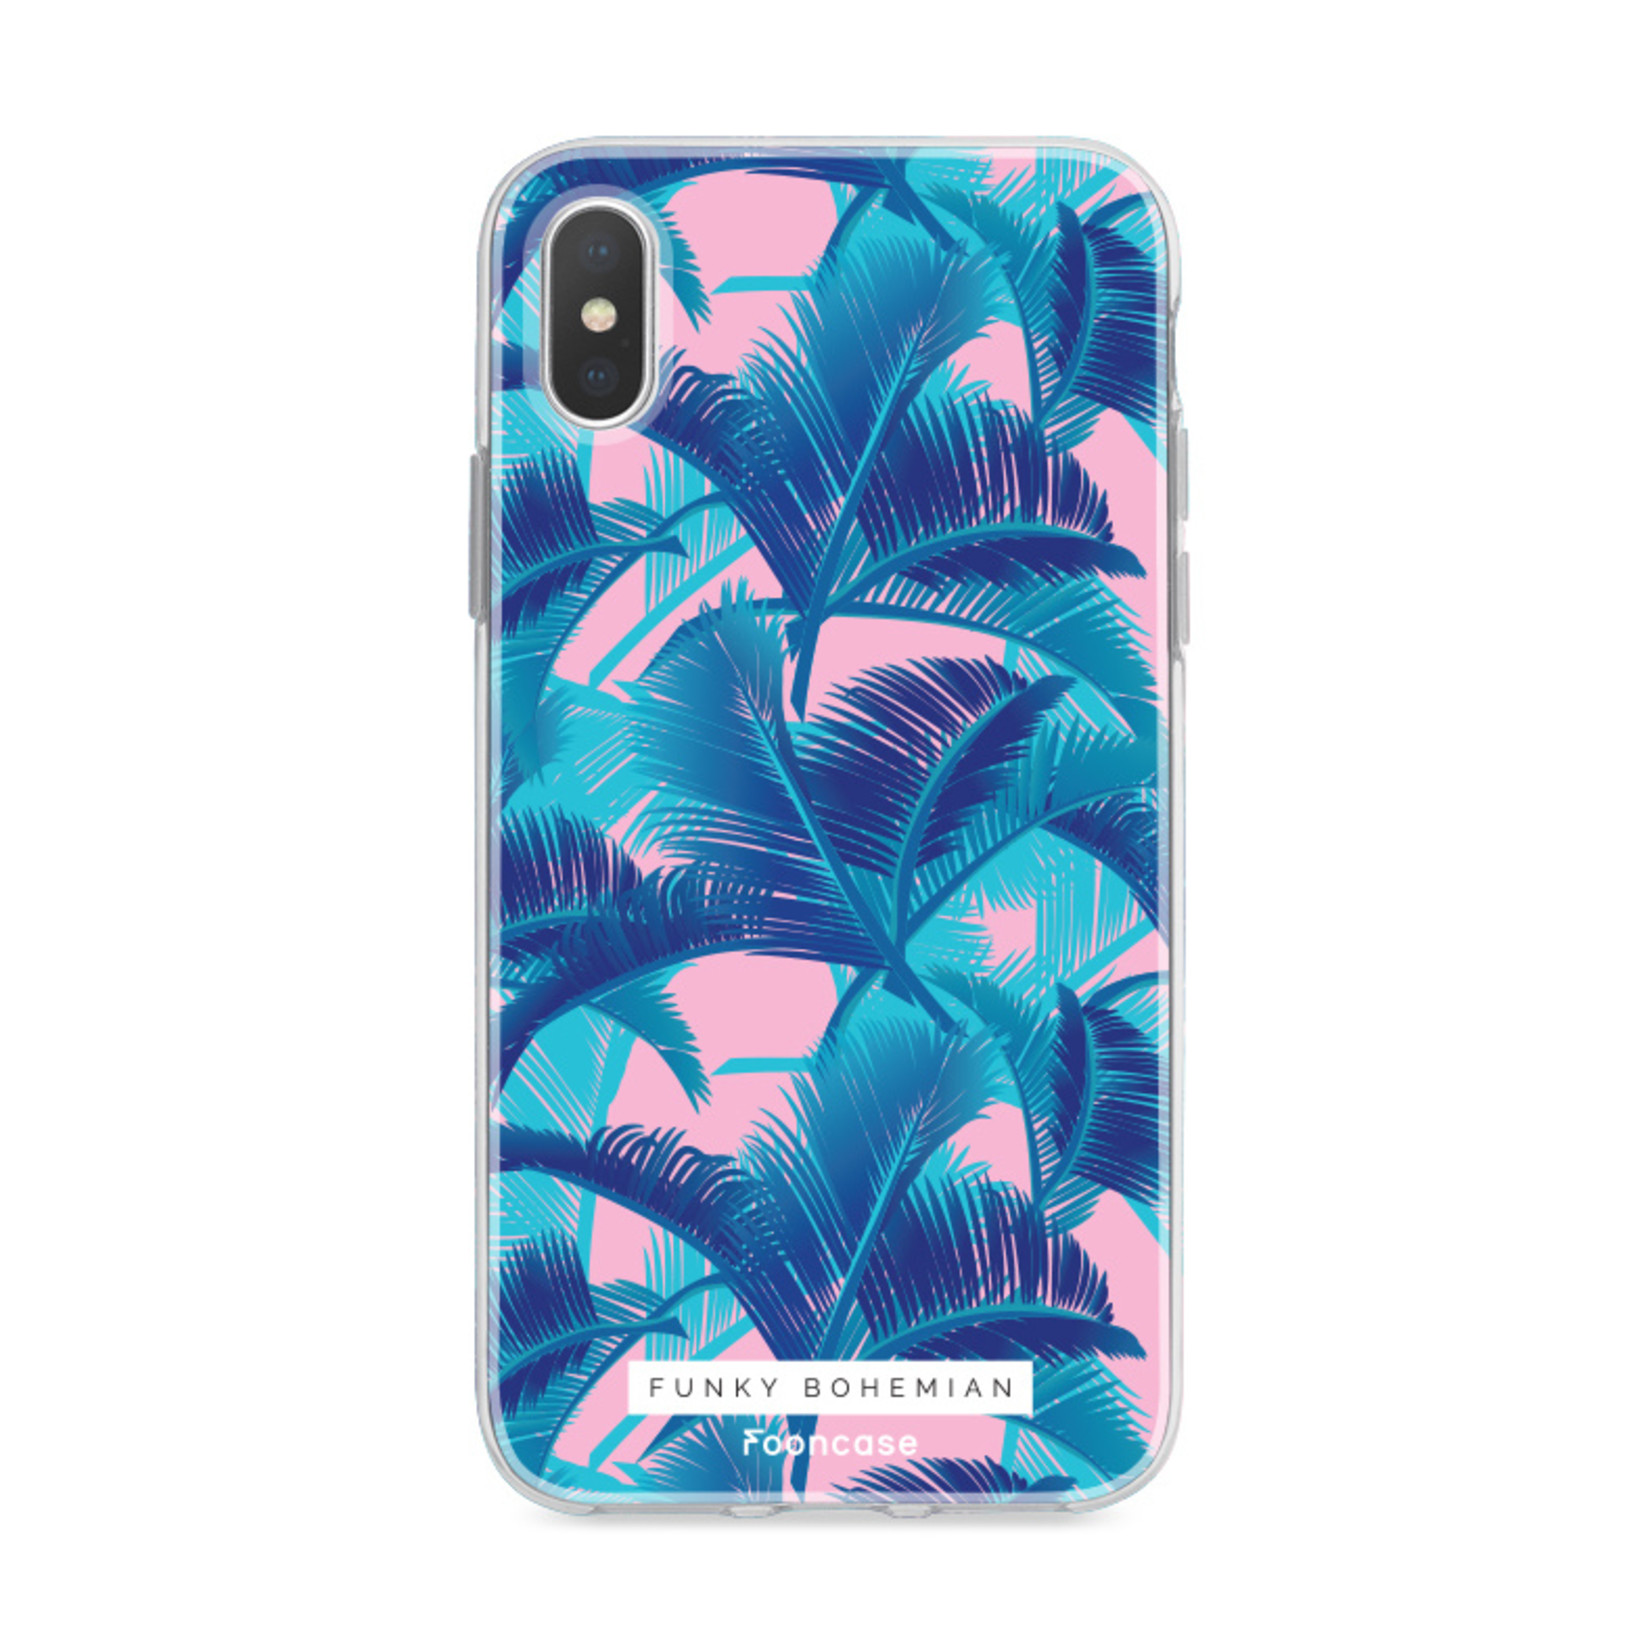 FOONCASE Iphone X Cover - Funky Bohemian